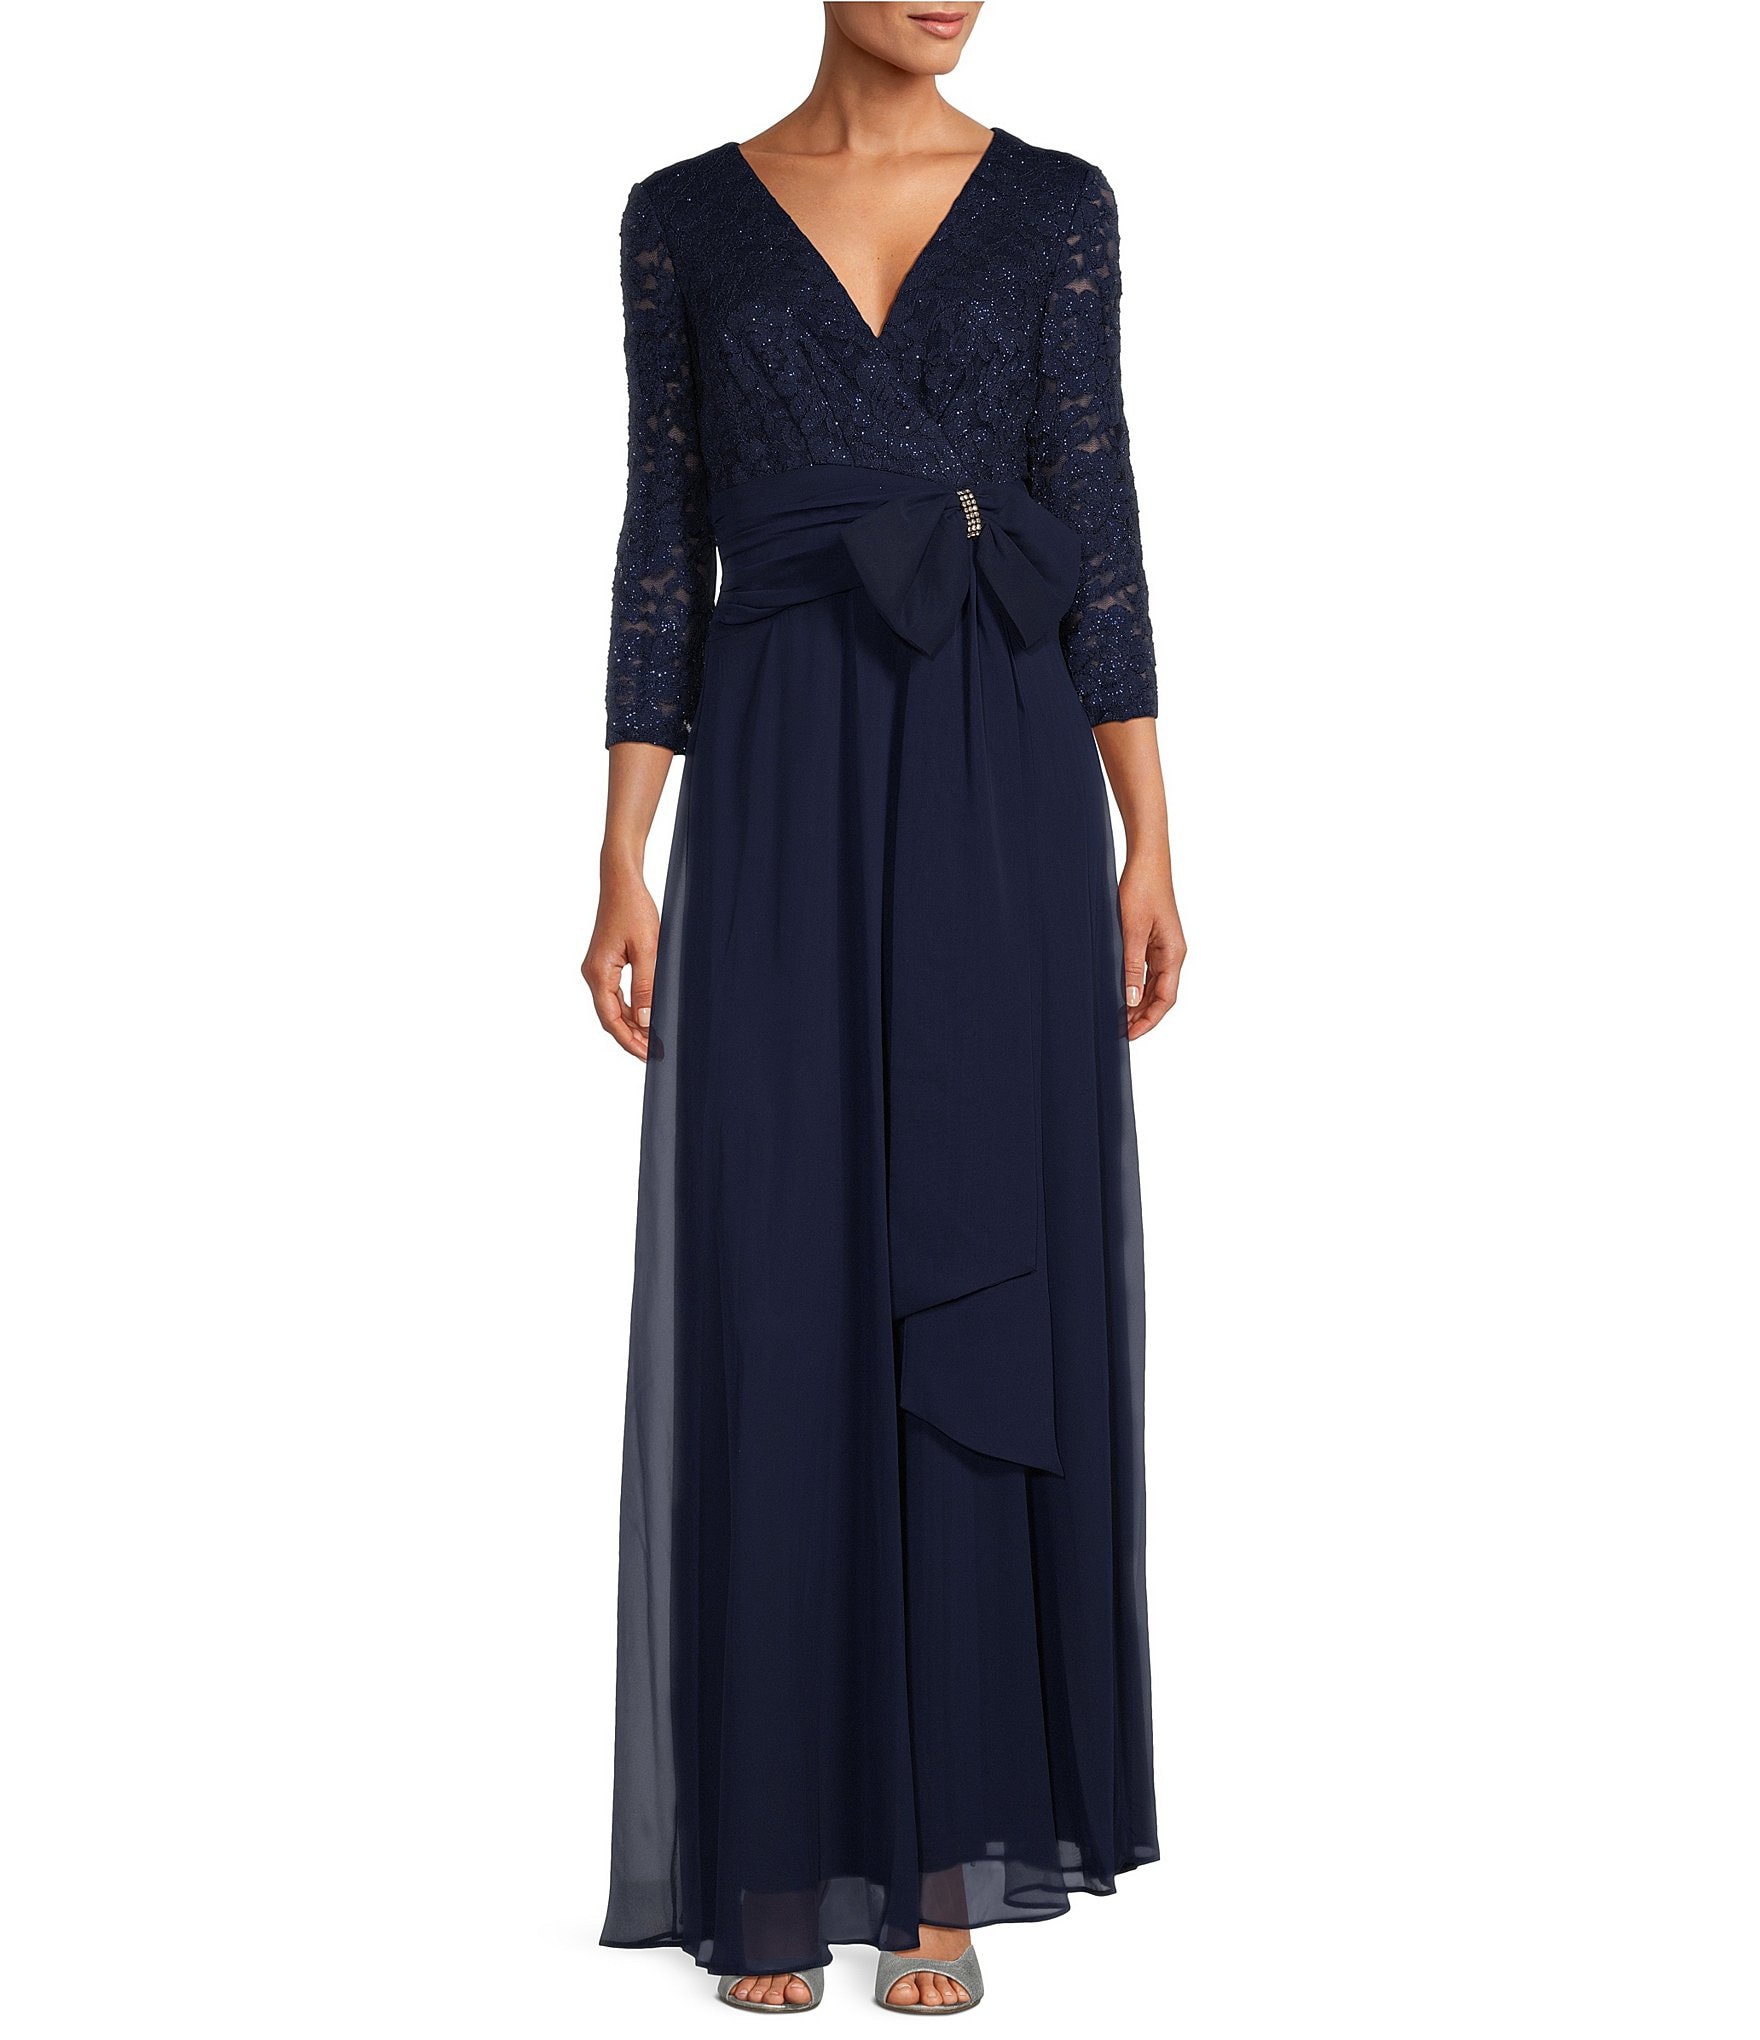 Jessica Howard A Line Women's Formal Dresses & Evening Gowns